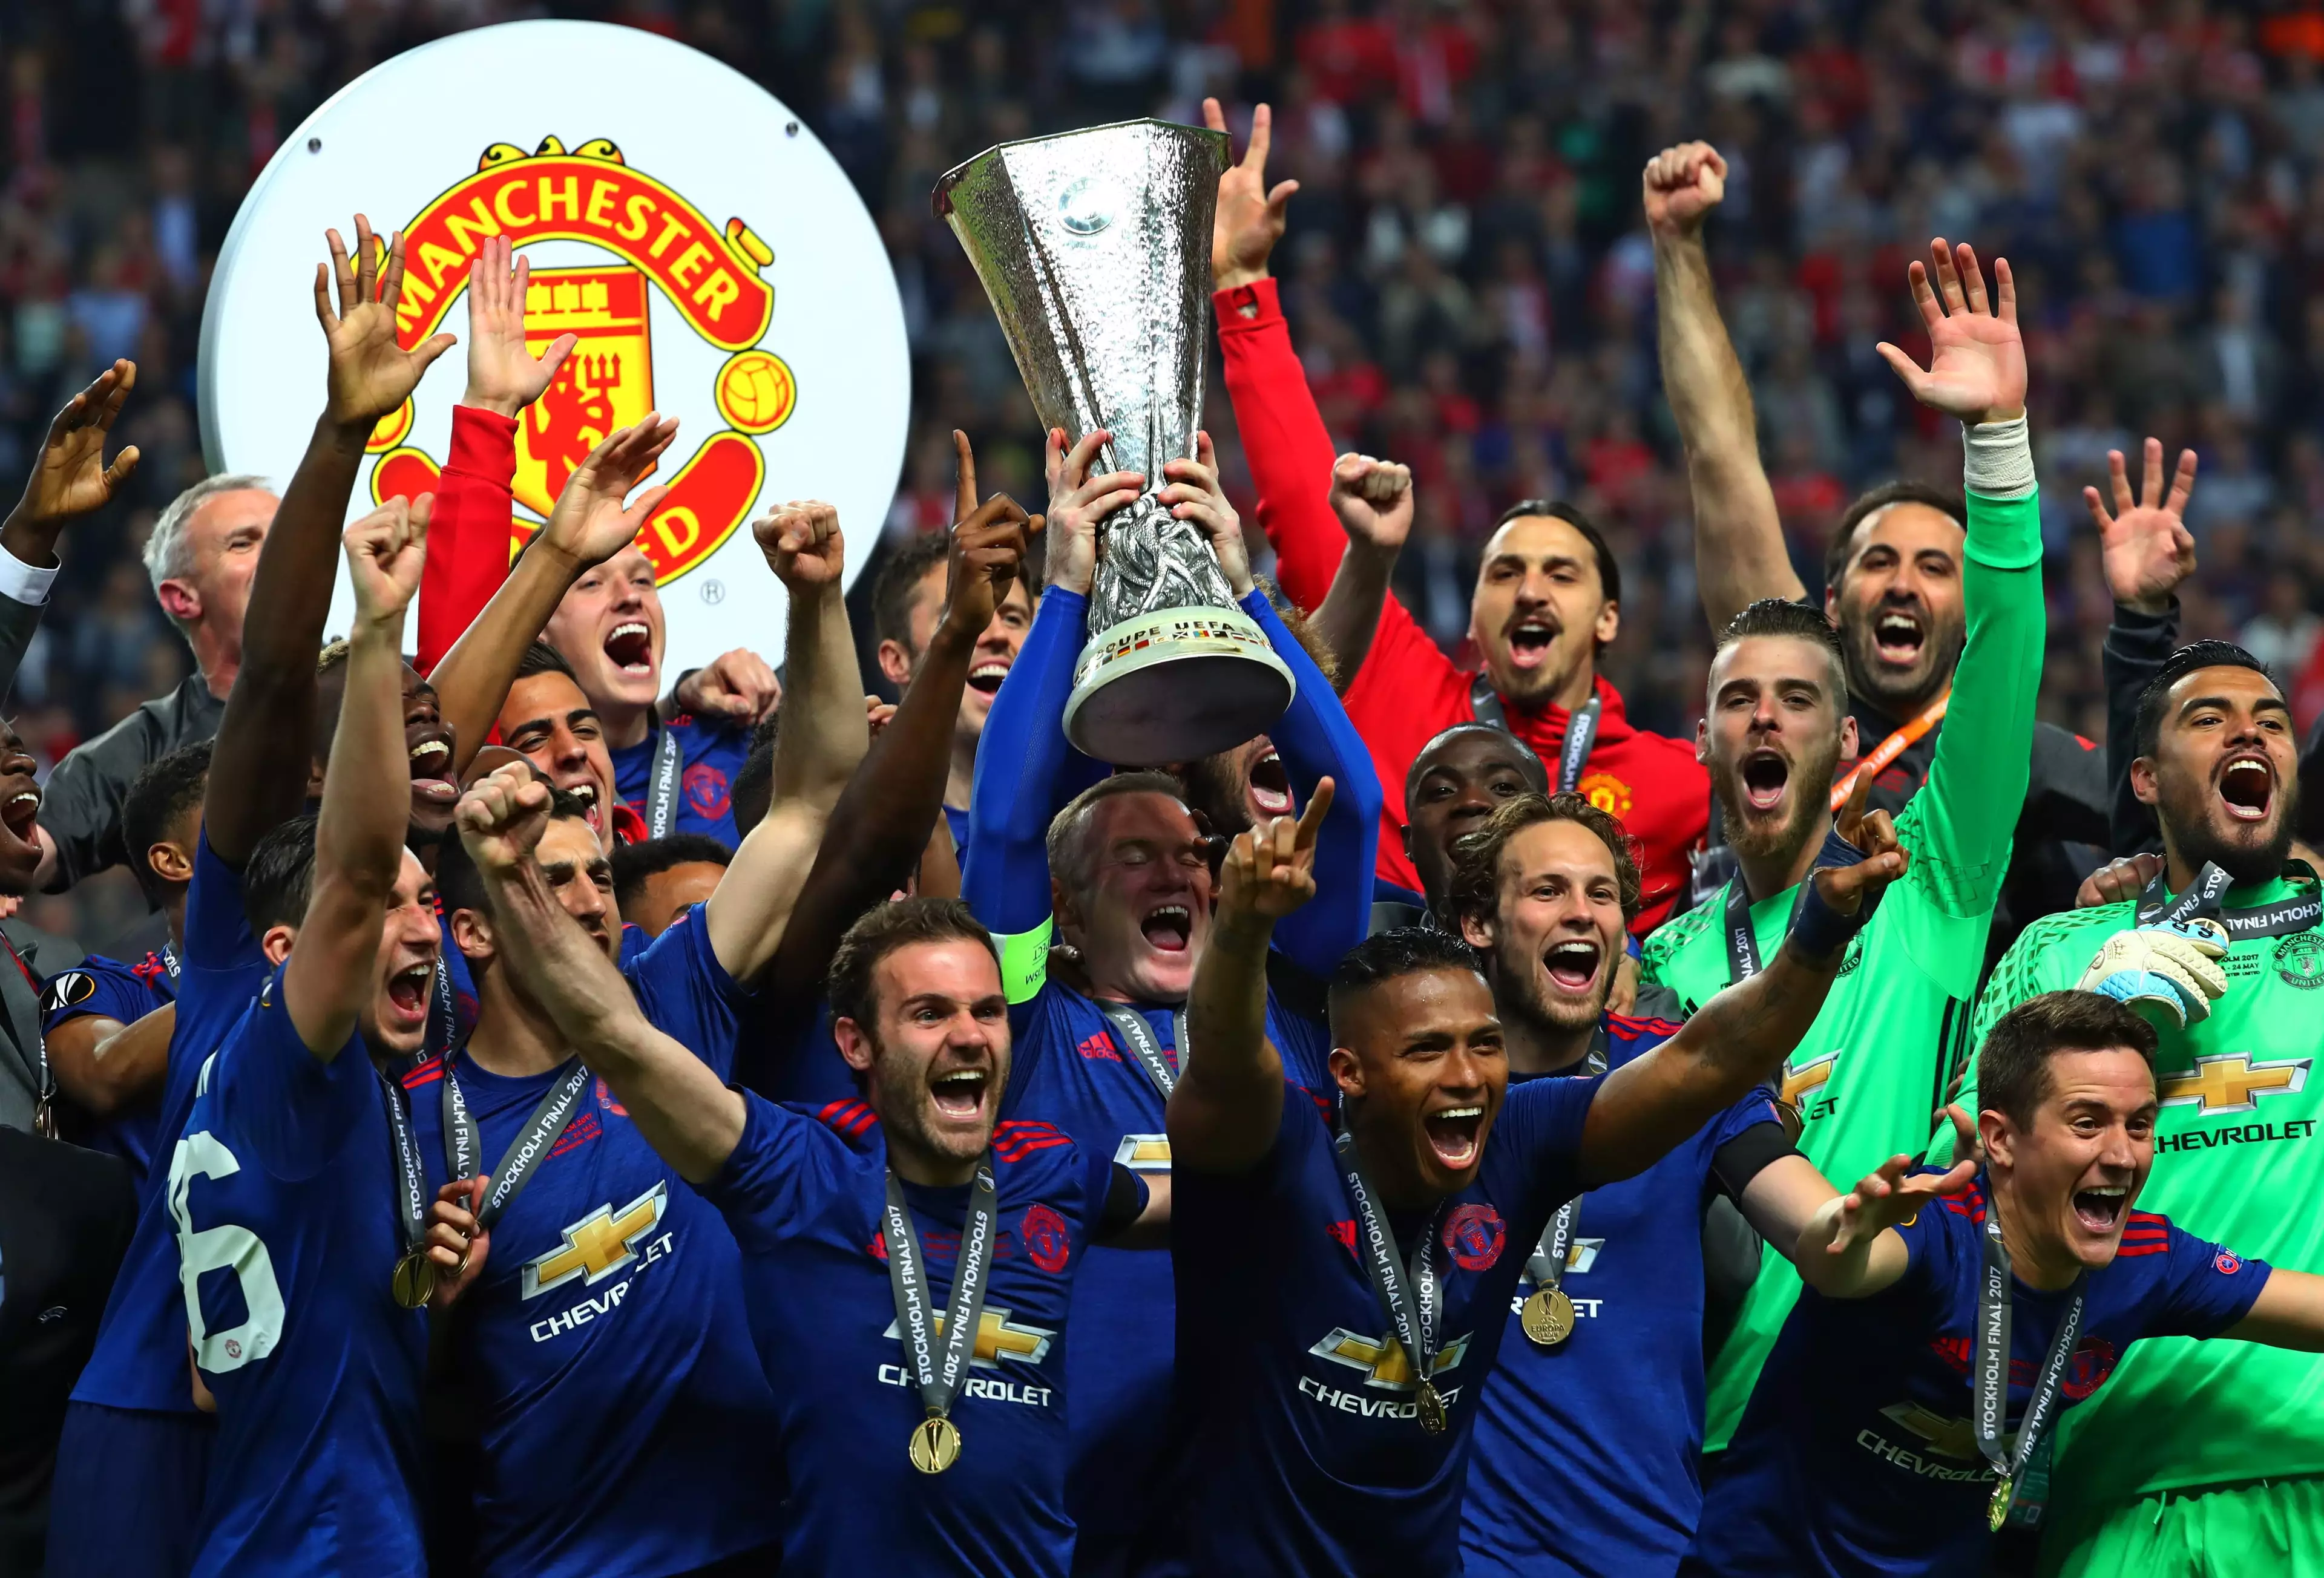 Manchester United last won the Europa League back in 2017 under former manager Jose Mourinho